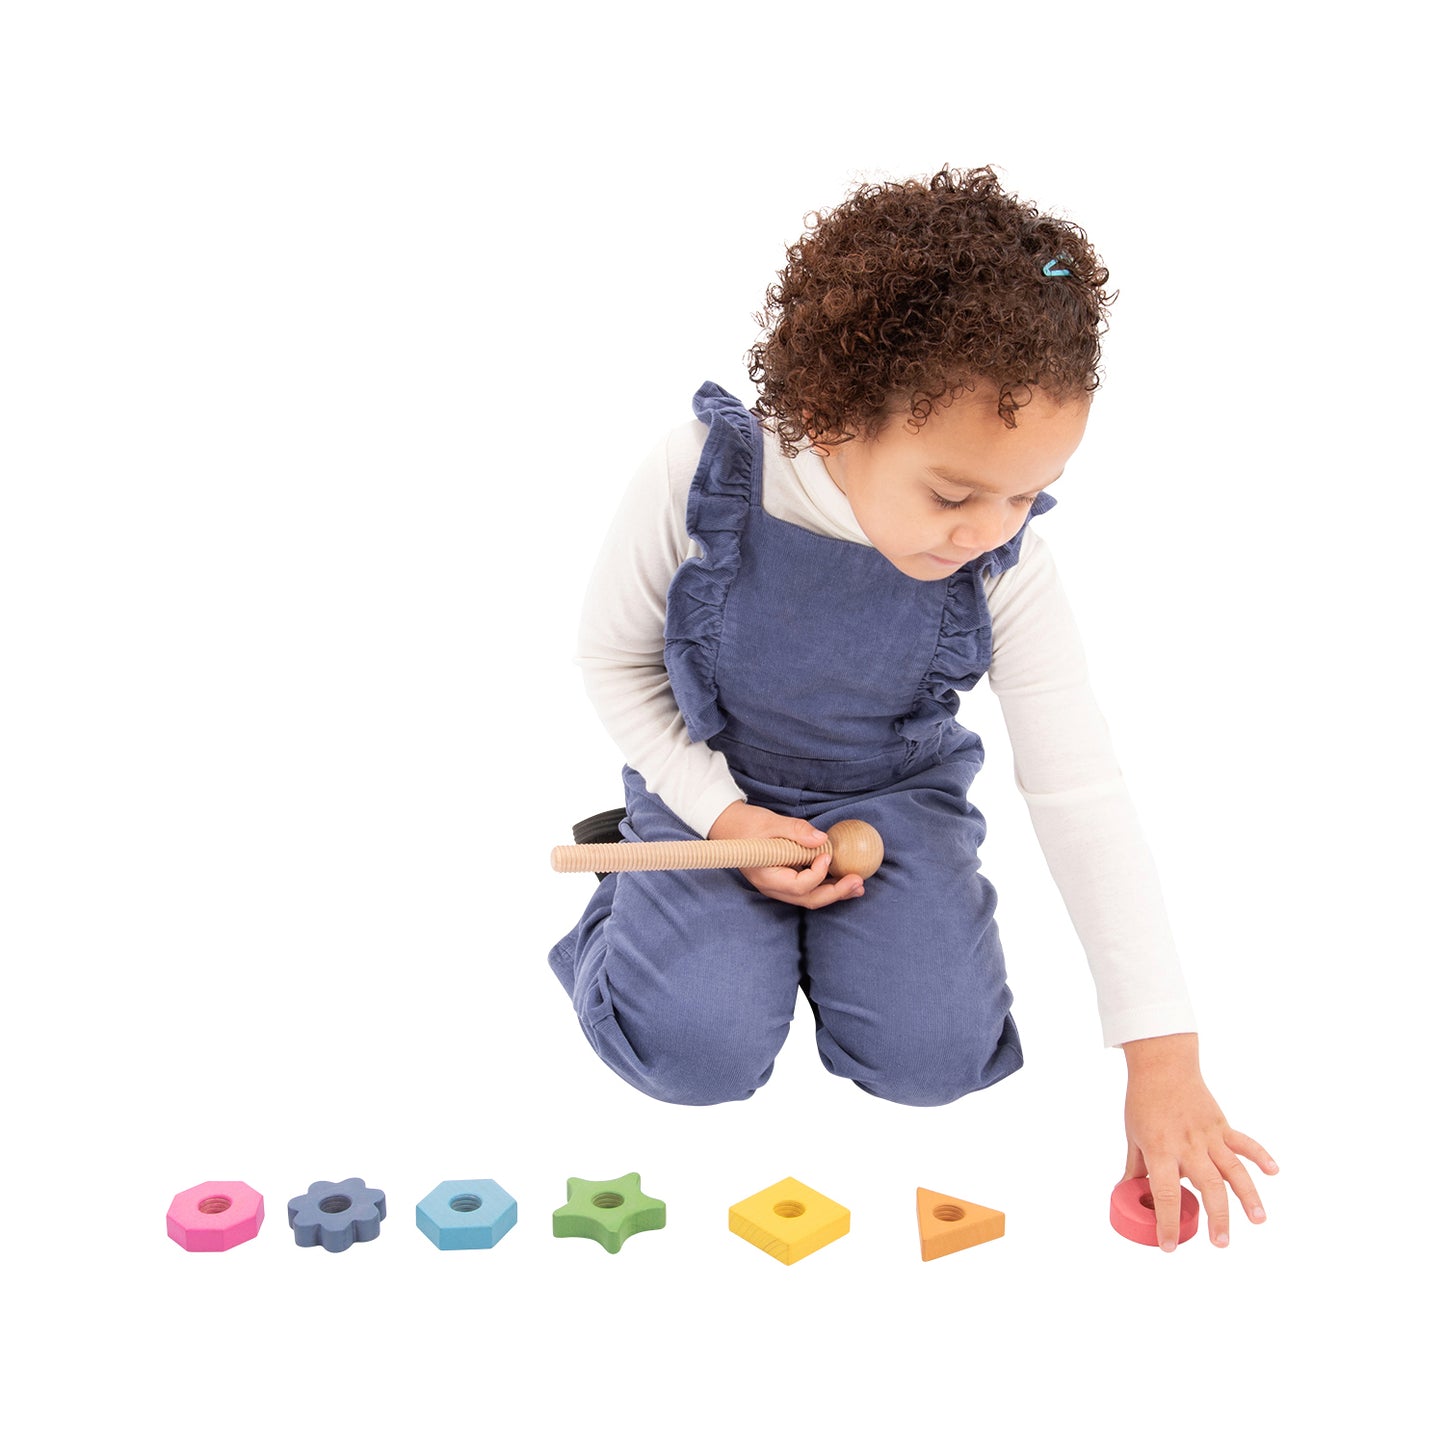 Rainbow Wooden Shape Twister - 7 Shapes and Colors